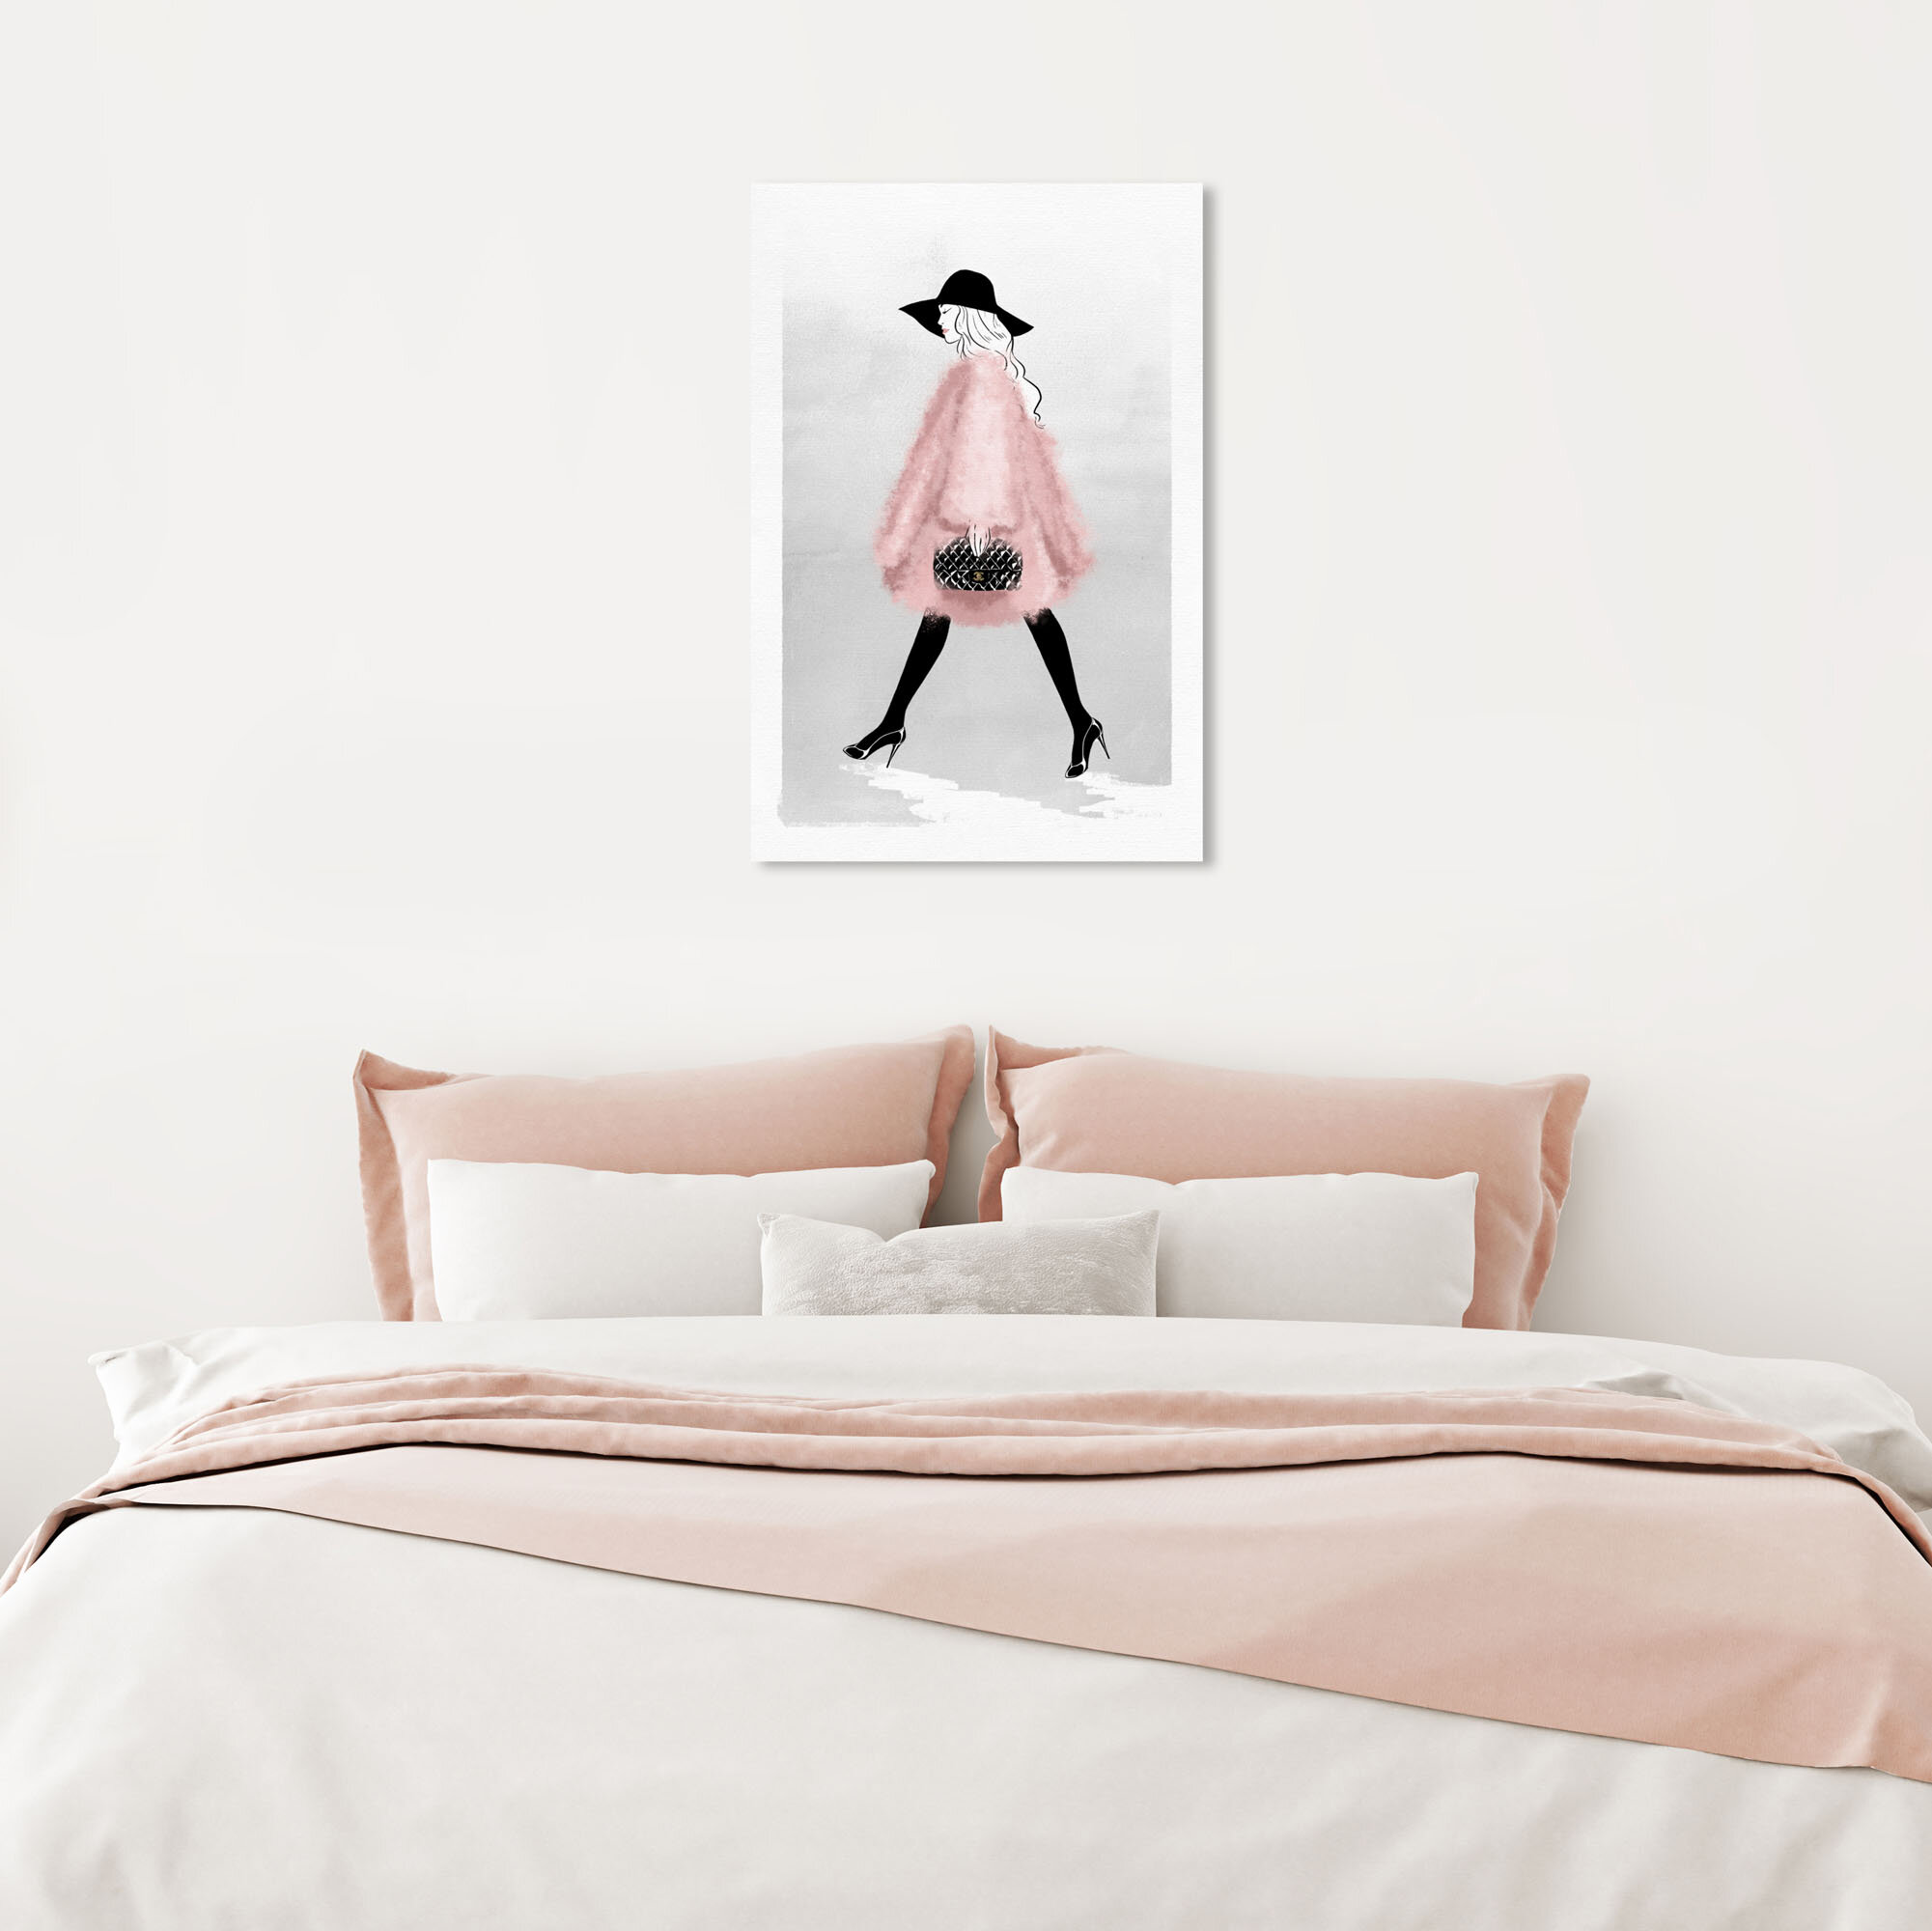 Cheap Simplicity Fashion Girl Poster and Print Wall Art Canvas Painting  Paris Perfume Bag Lips Picture Modern Home Decor For Room